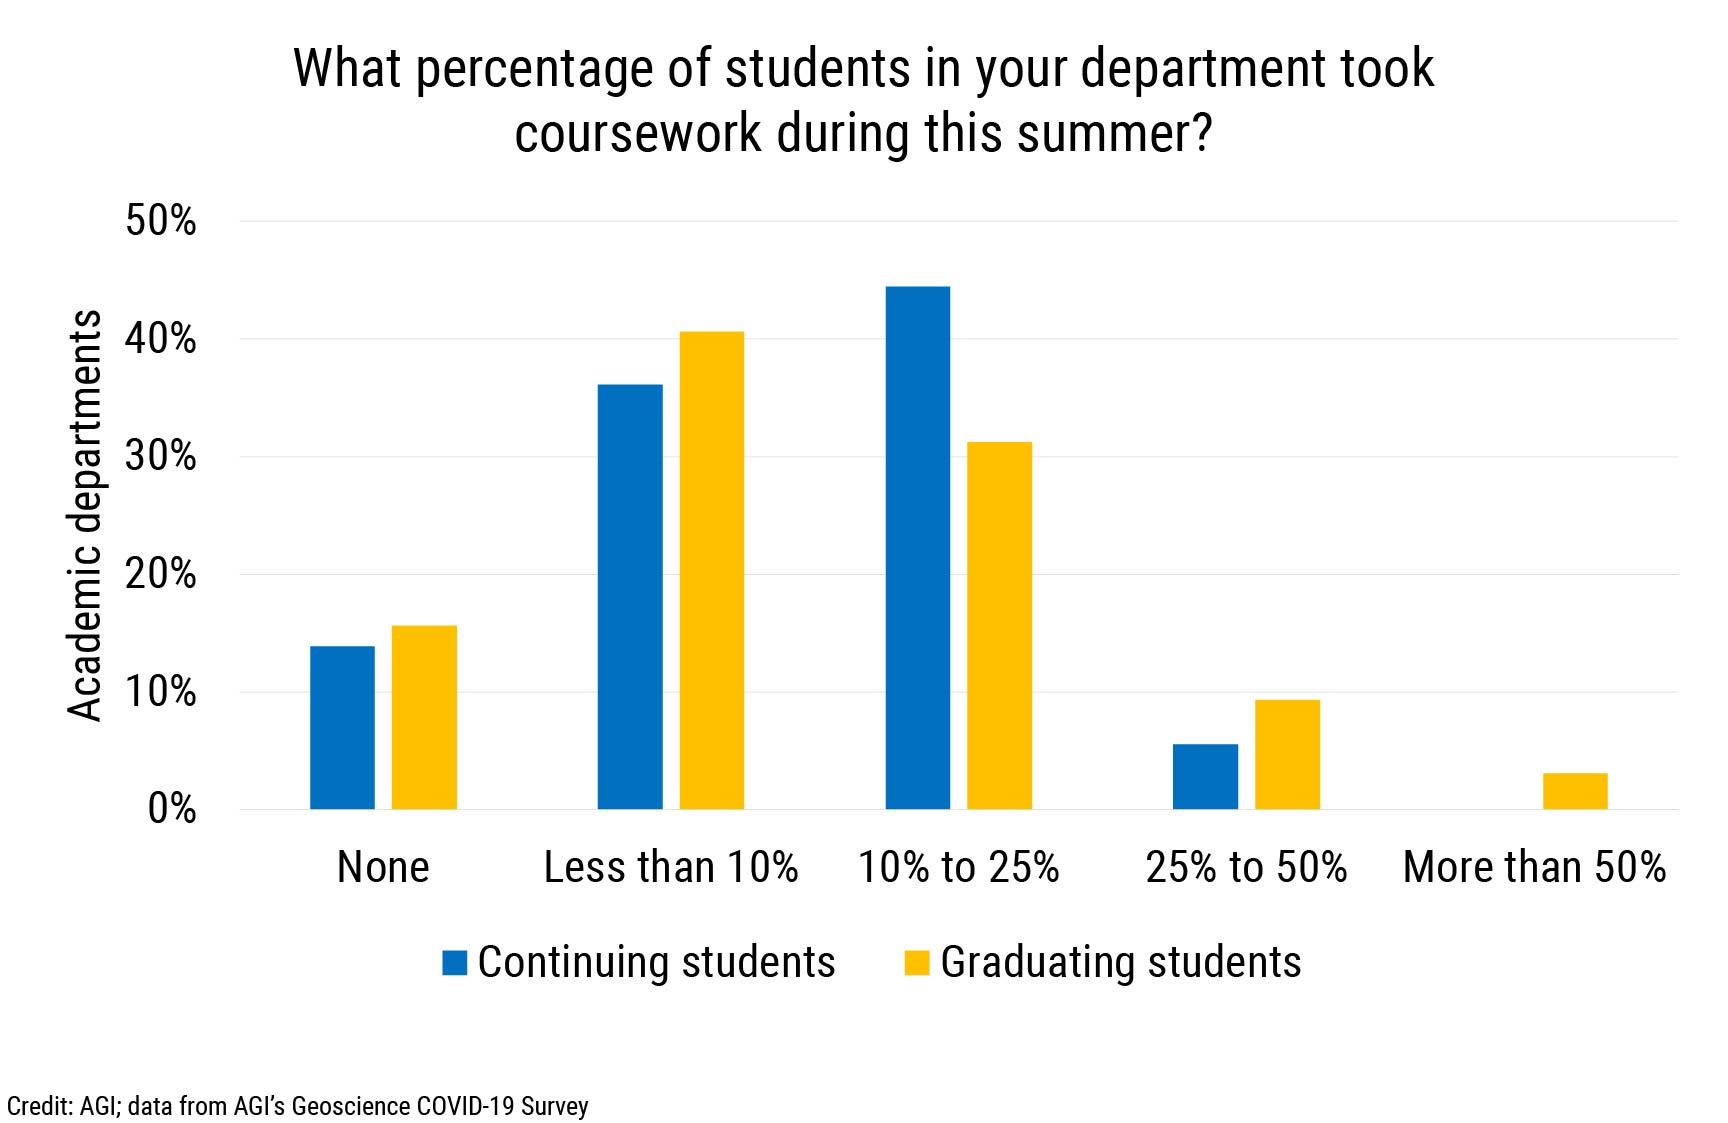 DB_2021-032 chart 05: What percentage of students in your department took coursework this summer? (Credit: AGI; data from AGI&#039;s Geoscience COVID-19 Survey)